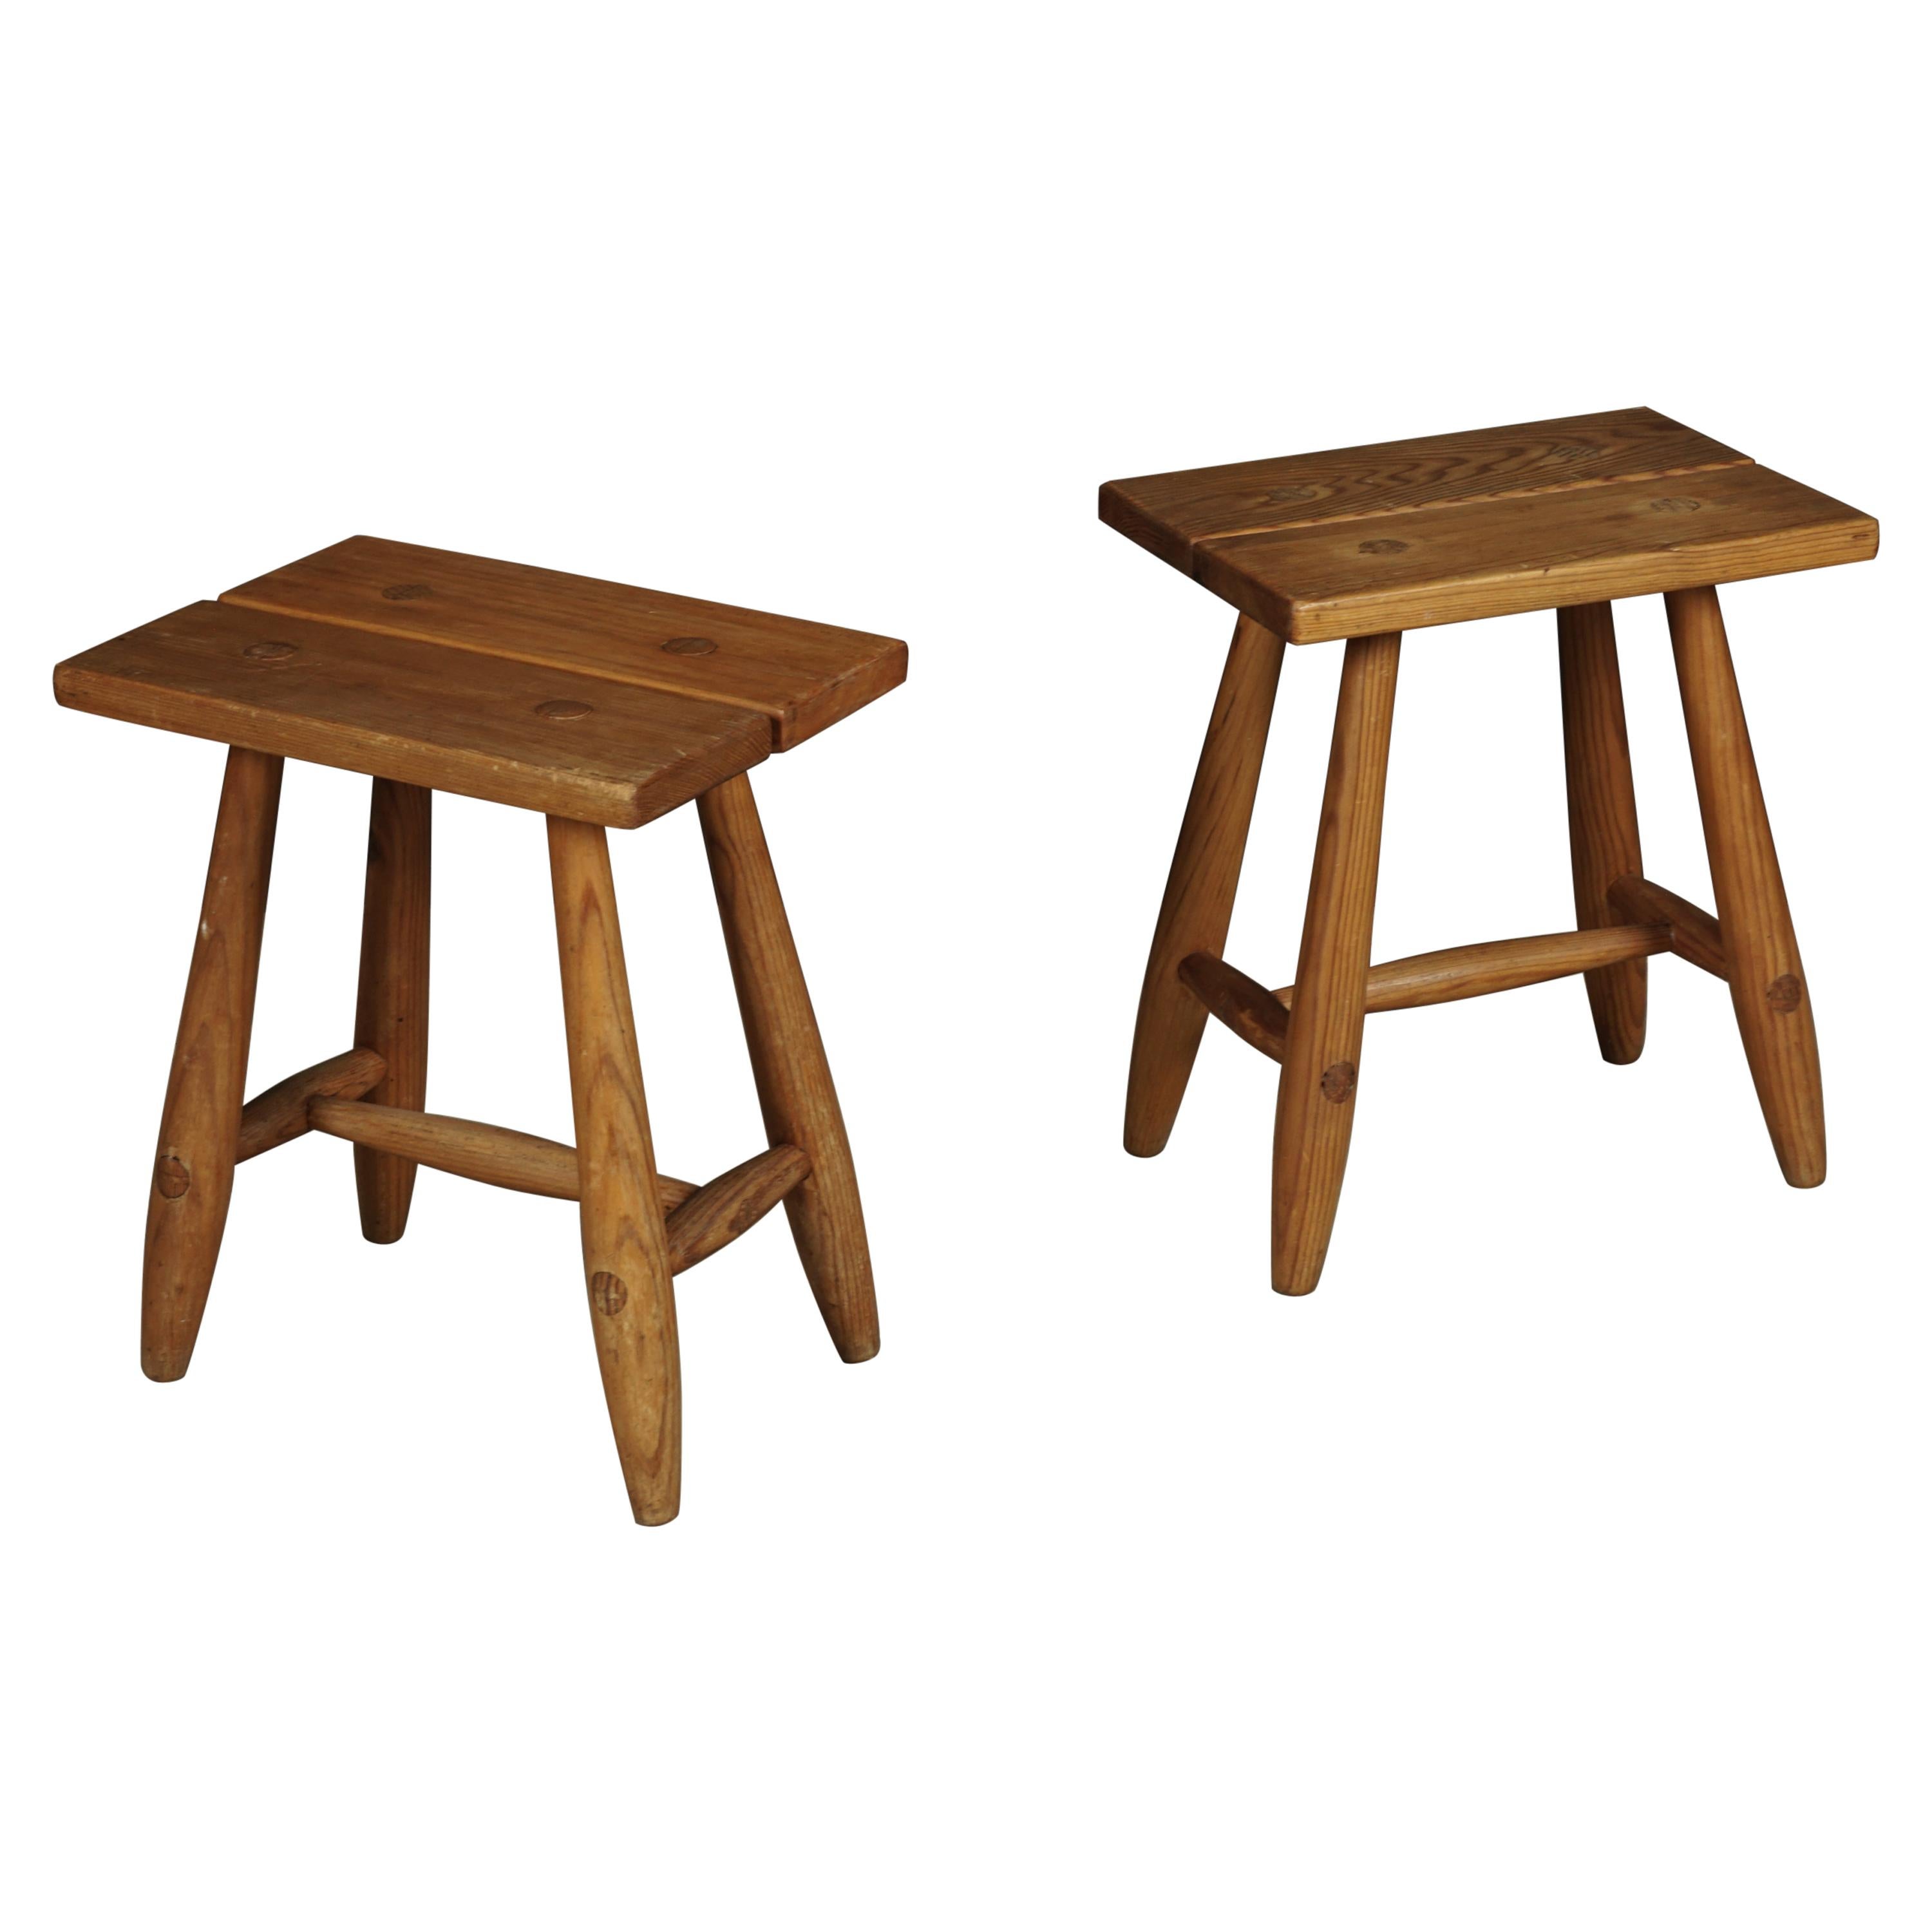 Pair of Midcentury Stools from Sweden, circa 1960